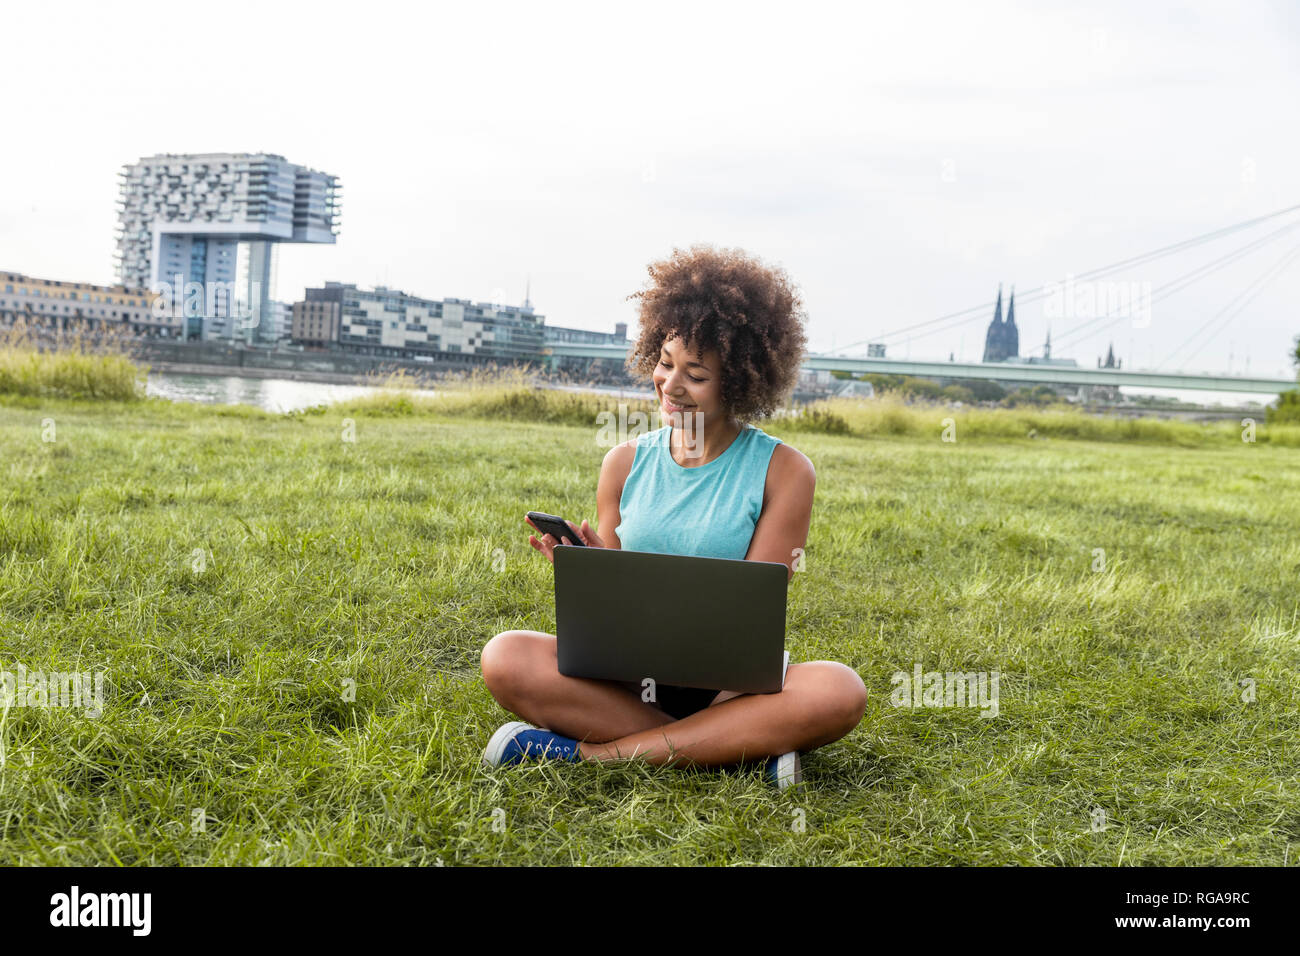 Germany, Cologne, woman sitting on meadow using laptop and cell phone Stock Photo